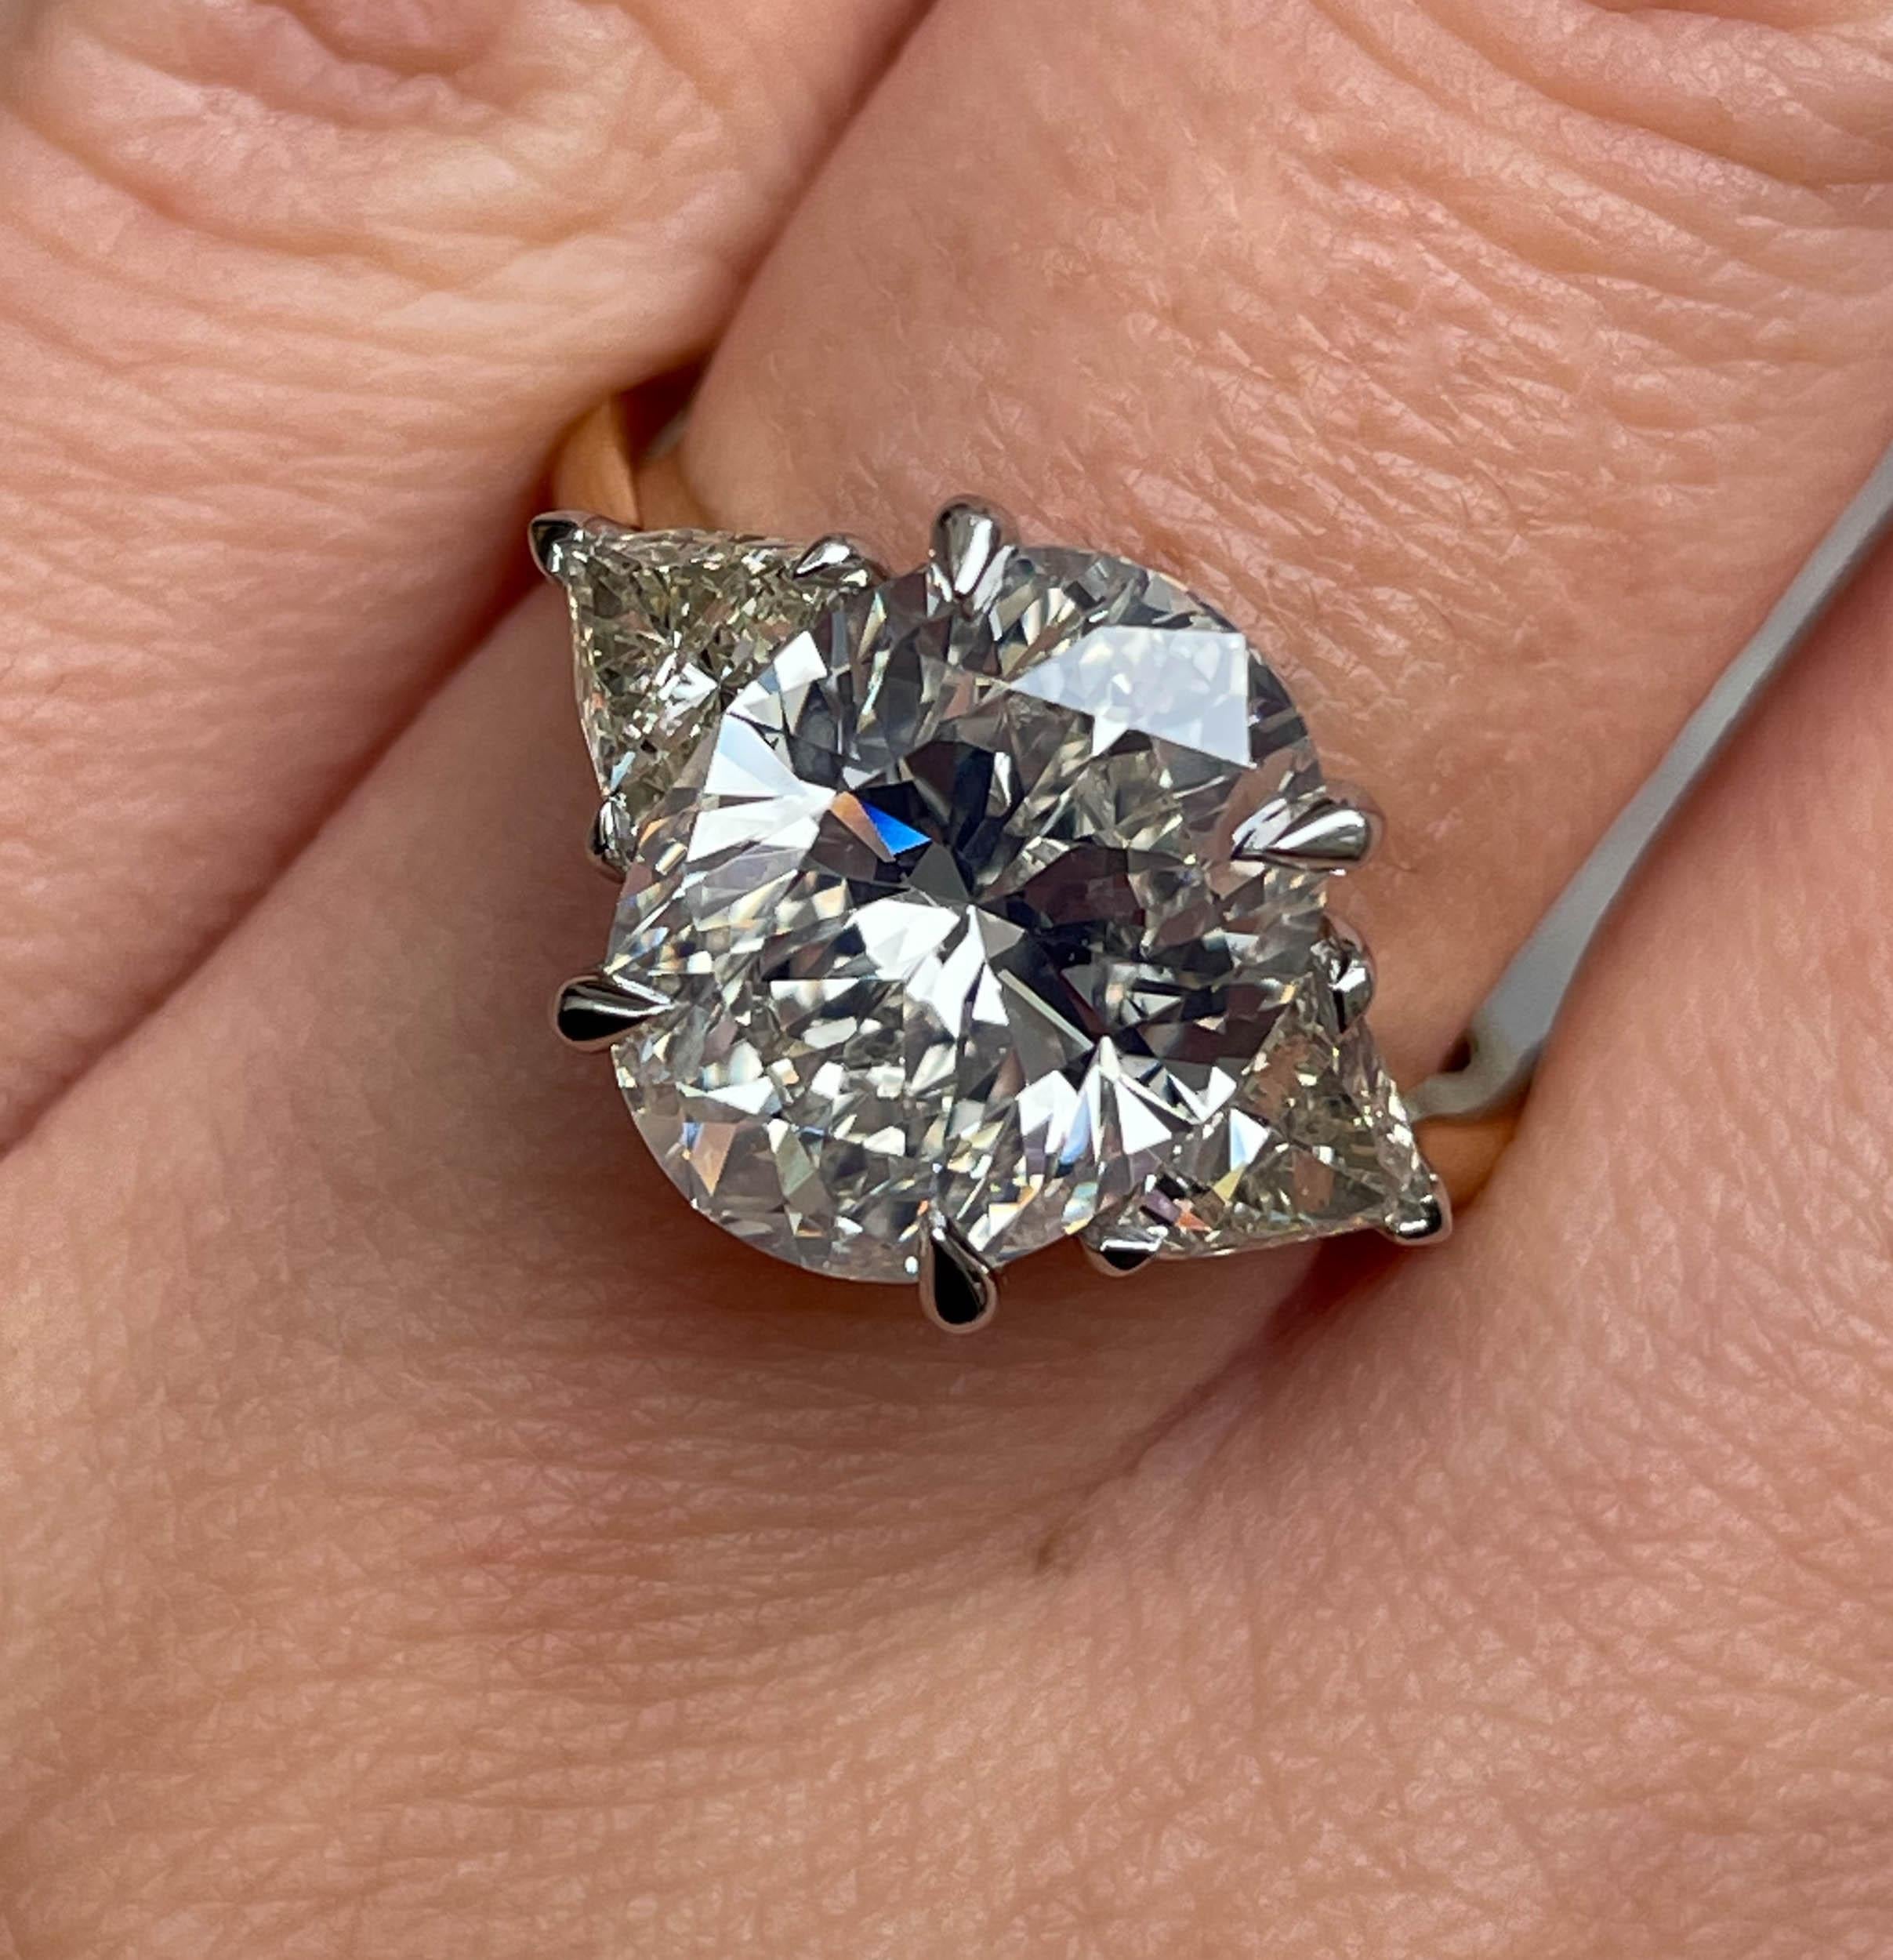 A Breathtaking Estate HANDMADE Platinum and 18k Yellow Gold (stamped) Oval Diamond Three-Stone Engagement ring. The Prong Set Oval Shaped Center Diamond is GIA Certified 4.18CT with measurements of 11.56x9.03x5.99mm in L color SI1 clarity (Appears